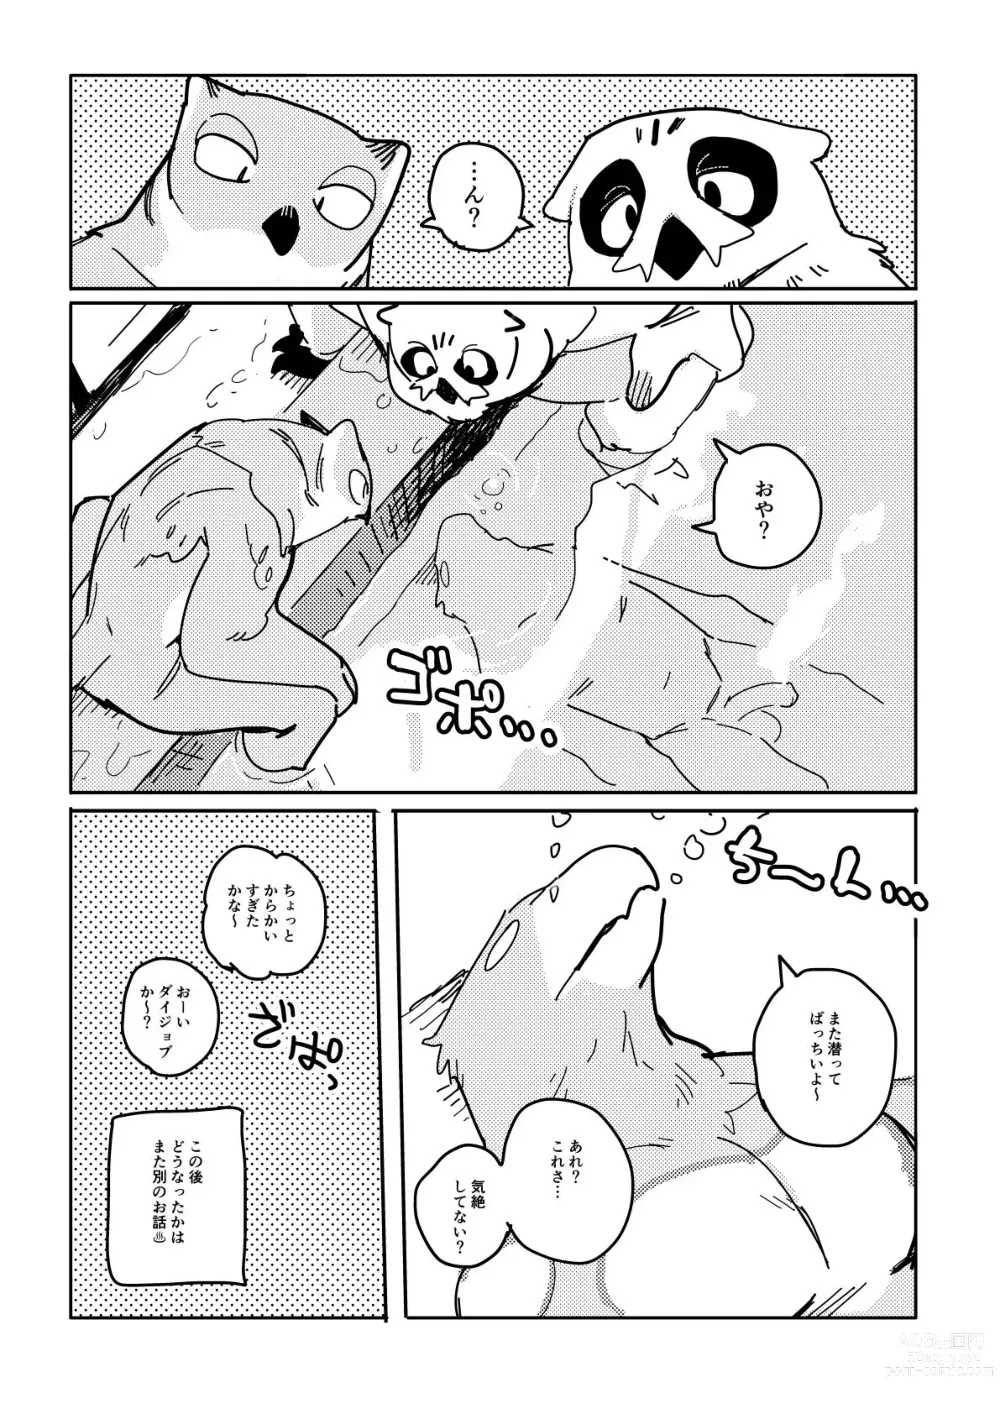 Page 14 of doujinshi - BIRD IN SPA!